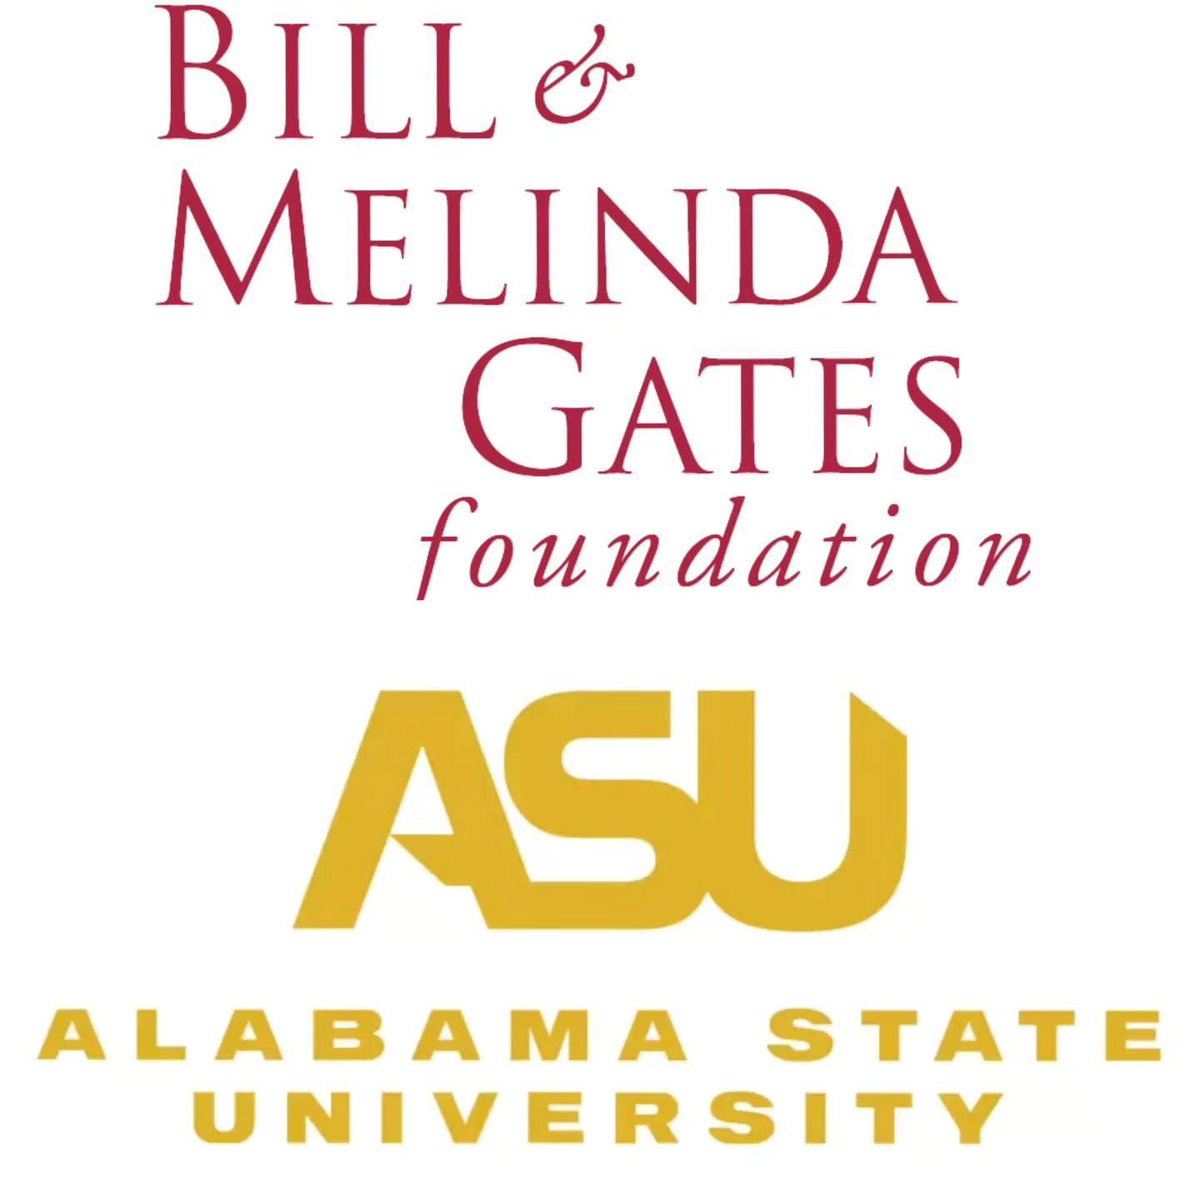 The Bill and Melinda Gates Foundation has awarded a $100,000 learning grant to Alabama State University to implement a 'Data Hub' over a six-month period that will allow it to centralize data storage and build analytic tools. Read more: alasu.edu/gates-foundati… #myASU #bamastate…